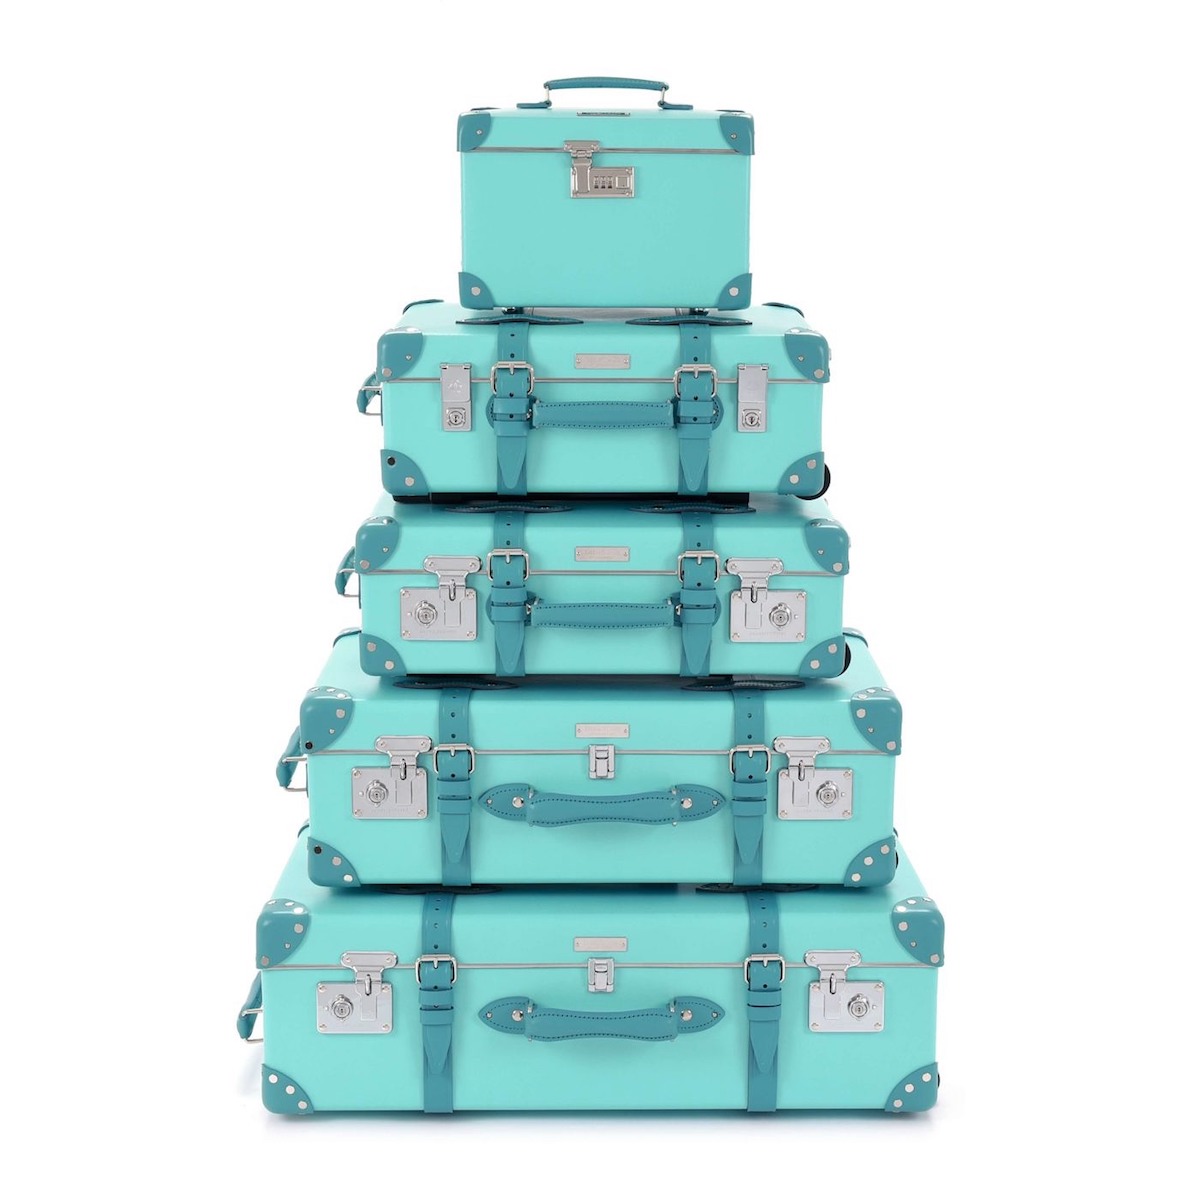 Tiffany & Co. x Globe-Trotter Luggage Collection - BagAddicts 